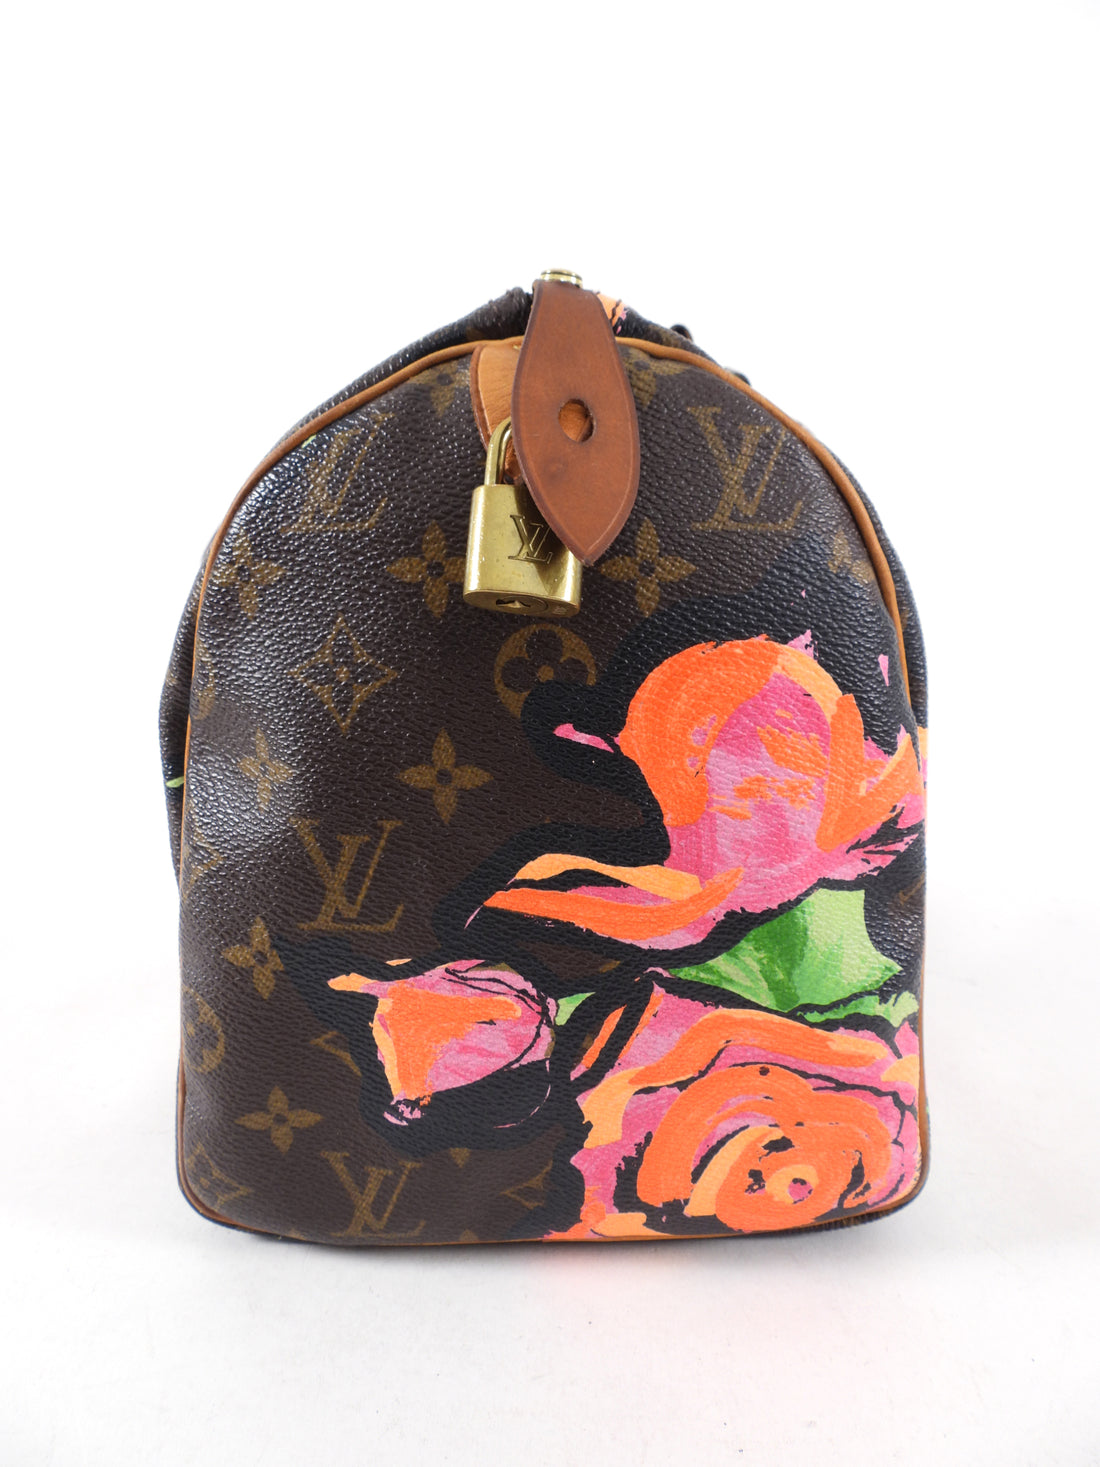 Louis Vuitton Stephen Sprouse Roses Limited Edition Speedy 30